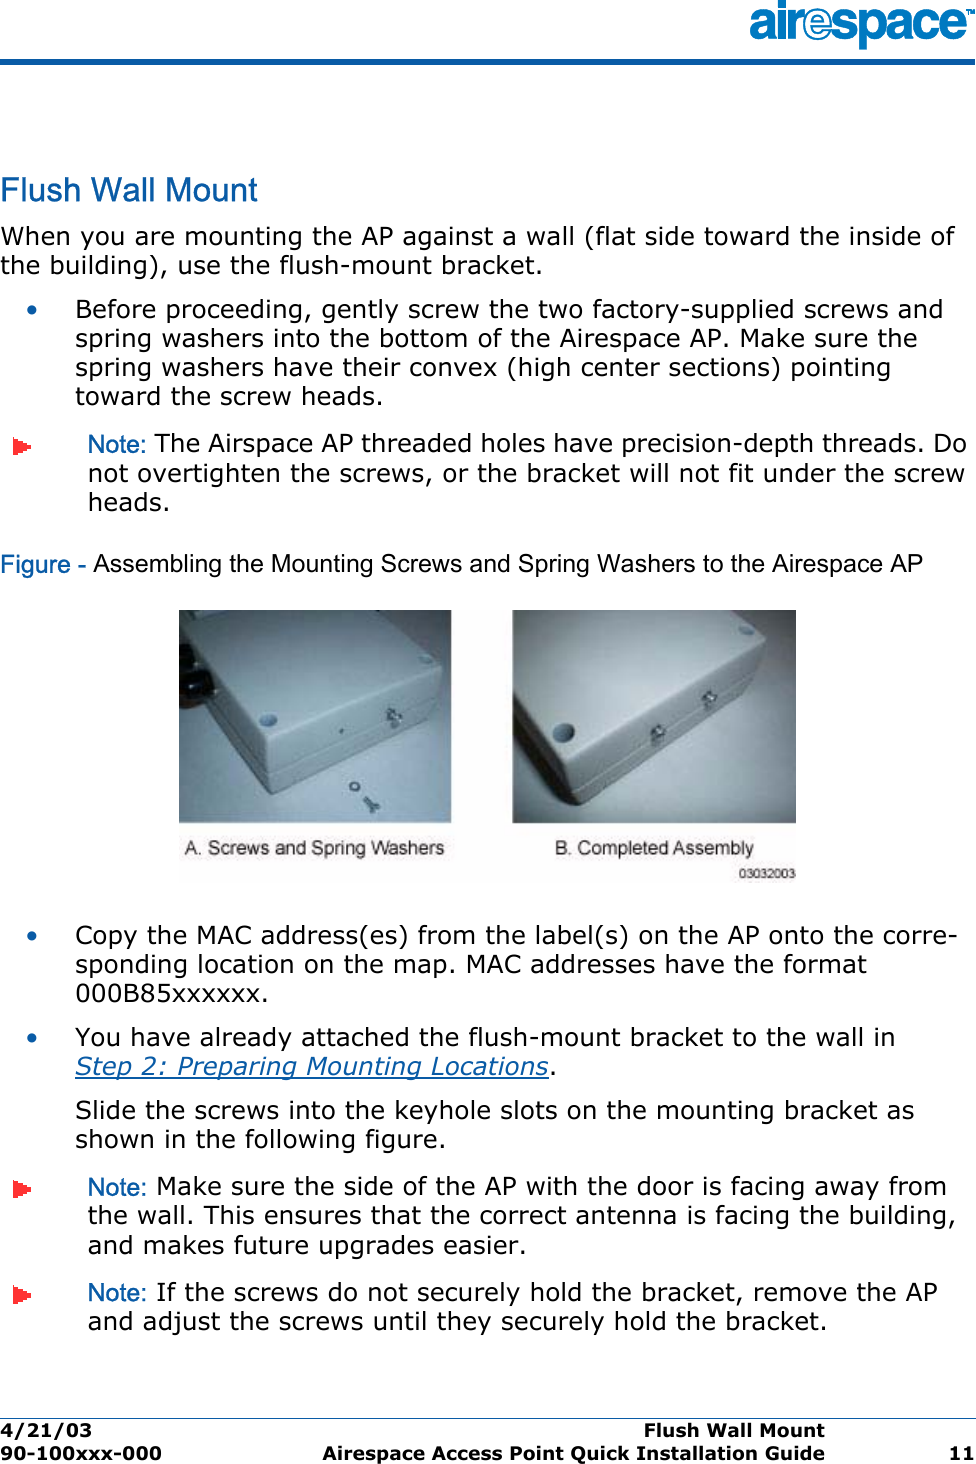 4/21/03 Flush Wall Mount  90-100xxx-000 Airespace Access Point Quick Installation Guide 11Flush Wall MountFlush Wall MountWhen you are mounting the AP against a wall (flat side toward the inside of the building), use the flush-mount bracket.•Before proceeding, gently screw the two factory-supplied screws and spring washers into the bottom of the Airespace AP. Make sure the spring washers have their convex (high center sections) pointing toward the screw heads.Note: The Airspace AP threaded holes have precision-depth threads. Do not overtighten the screws, or the bracket will not fit under the screw heads.Figure - Assembling the Mounting Screws and Spring Washers to the Airespace AP•Copy the MAC address(es) from the label(s) on the AP onto the corre-sponding location on the map. MAC addresses have the format 000B85xxxxxx.•You have already attached the flush-mount bracket to the wall in Step 2: Preparing Mounting Locations.Slide the screws into the keyhole slots on the mounting bracket as shown in the following figure.Note: Make sure the side of the AP with the door is facing away from the wall. This ensures that the correct antenna is facing the building, and makes future upgrades easier.Note: If the screws do not securely hold the bracket, remove the AP and adjust the screws until they securely hold the bracket.